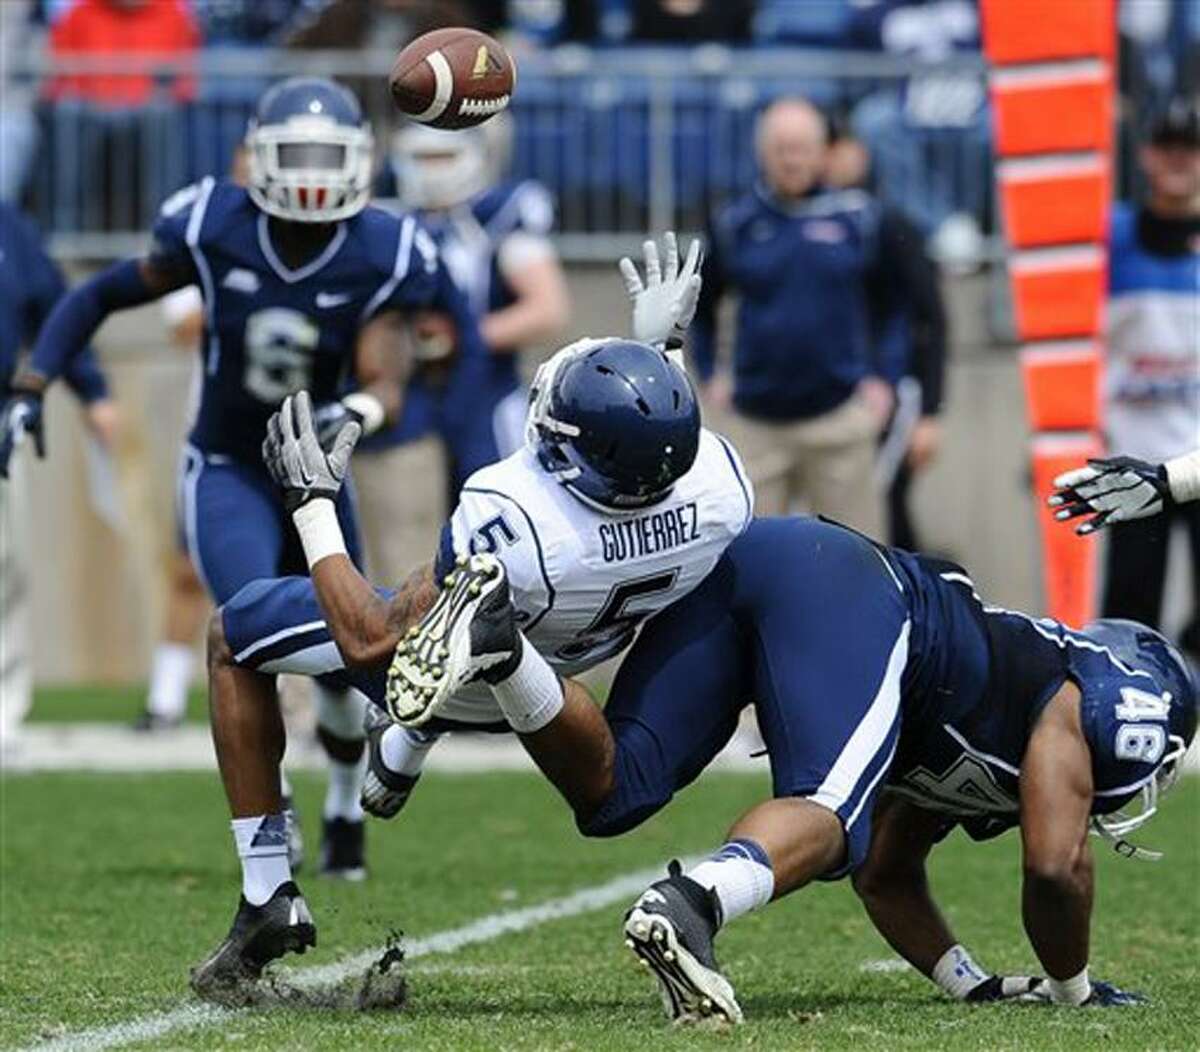 Connecticut's Ricky Gutierrez, left, is upended by Marquise Vann during the UConn's Blue-White spring NCAA college football game at Rentschler Field in East Hartford, Conn., Saturday, April 20, 2013. (AP Photo/Jessica Hill)